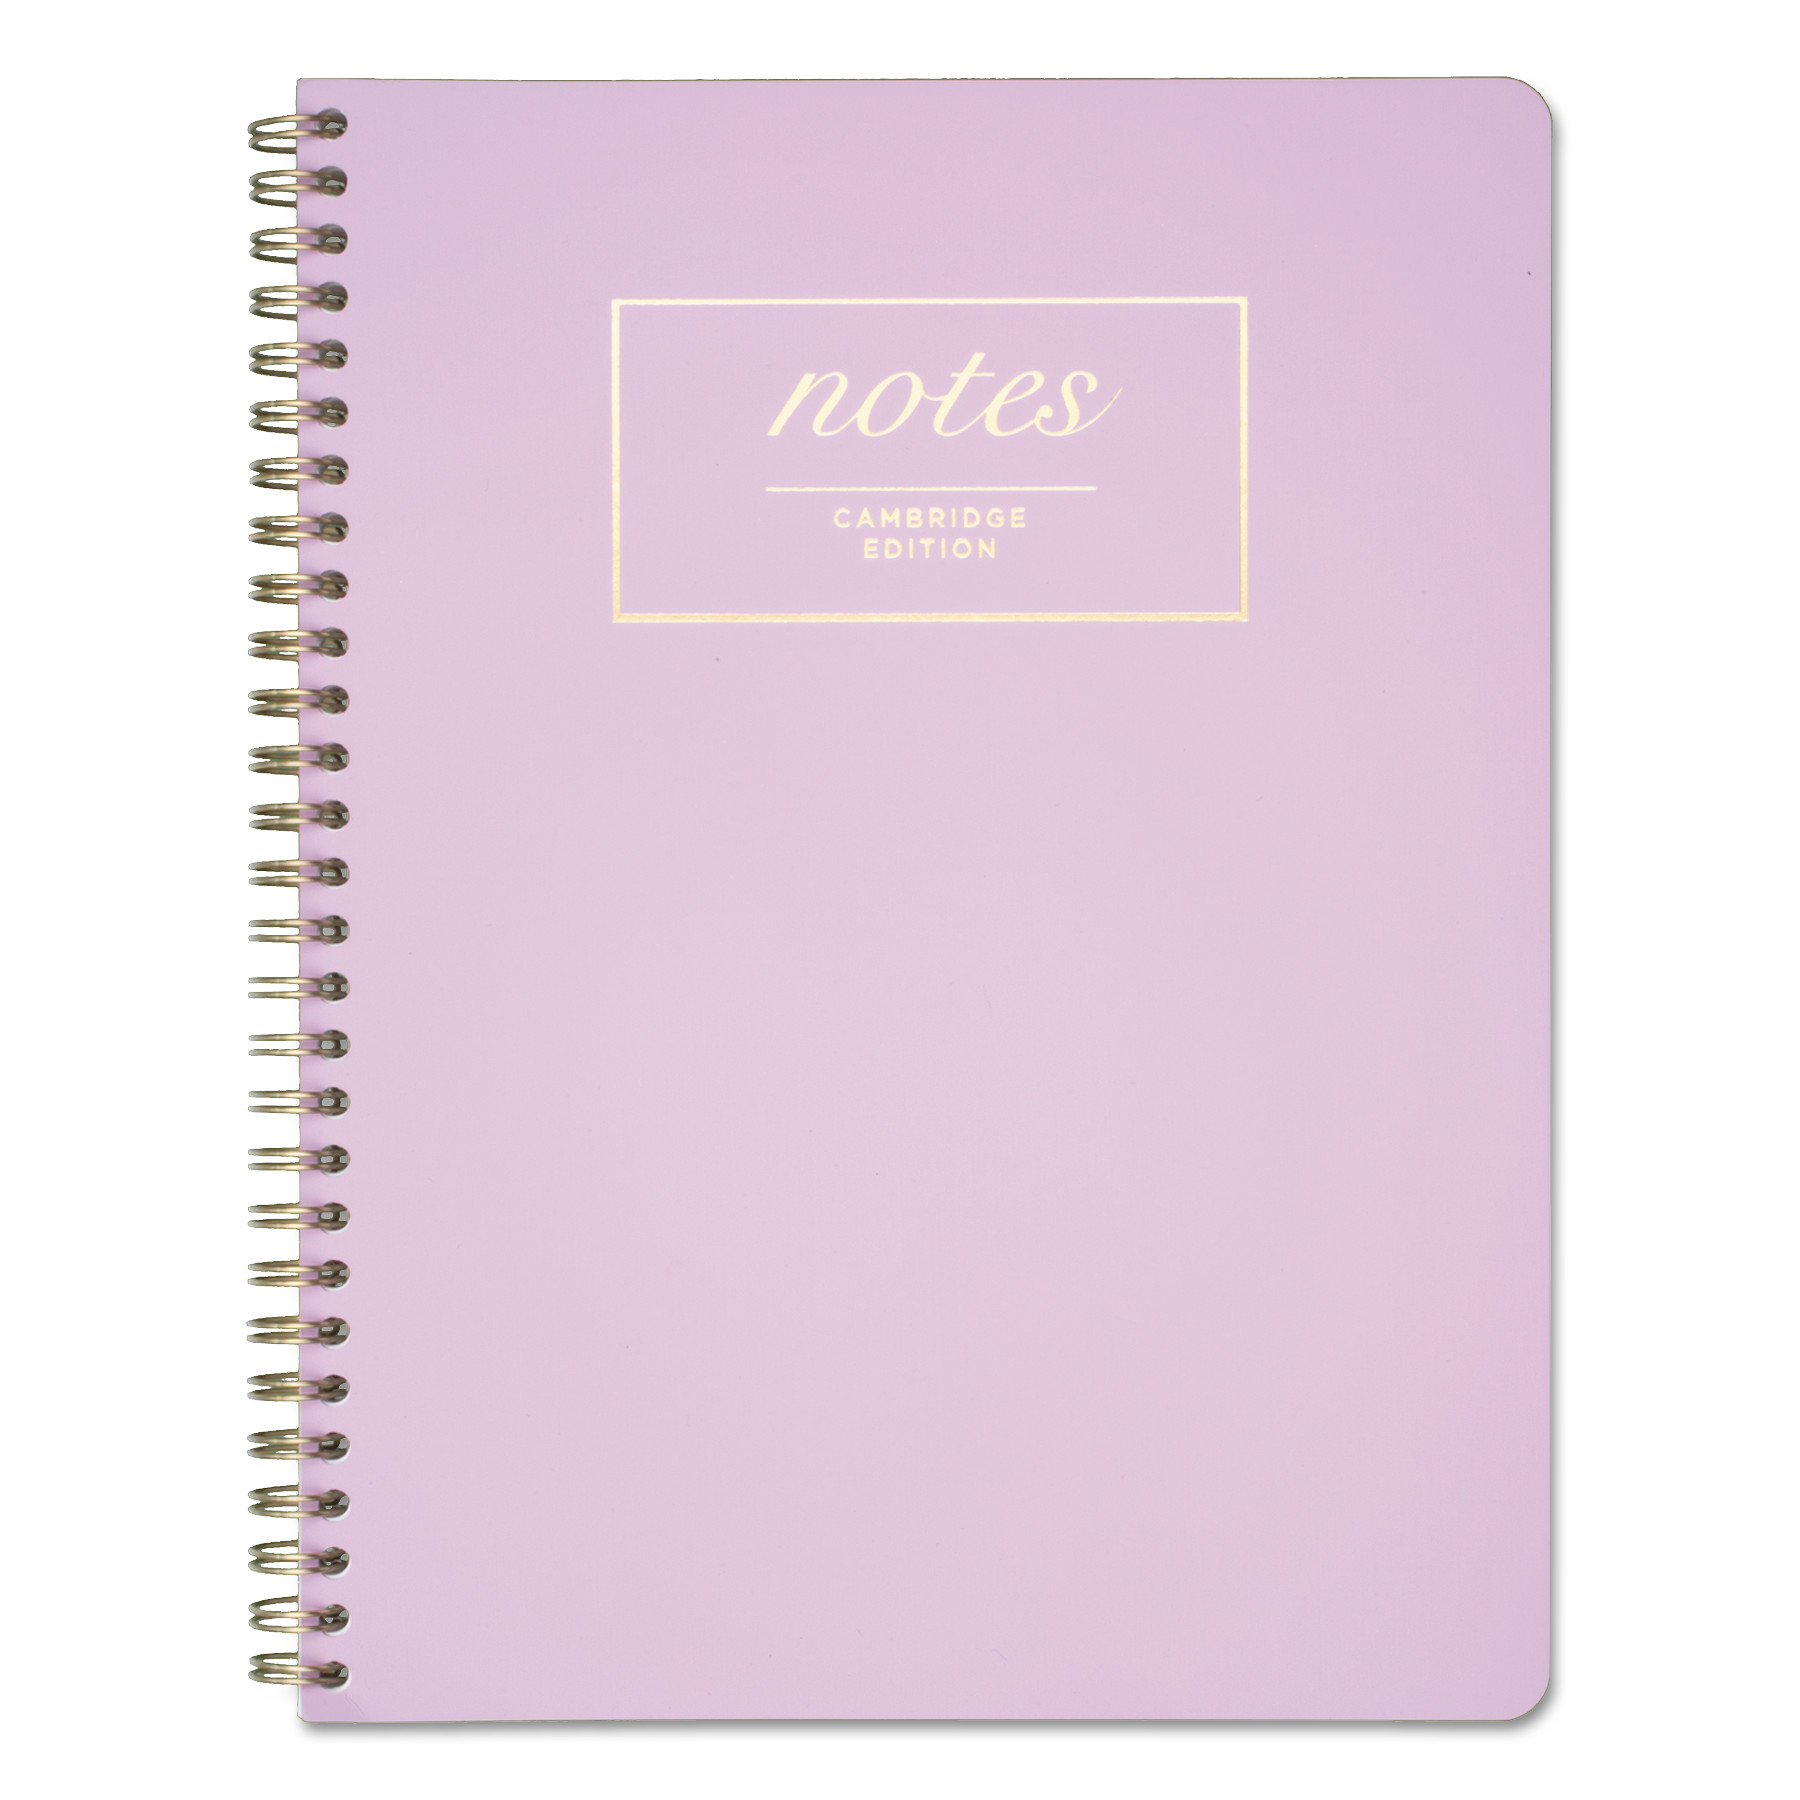  Cambridge 59309 Workstyle Notebook, 1 Subject, Wide/Legal Rule, Lavender Cover, 9.5 x 7.25, 80 Sheets (MEA59309) 